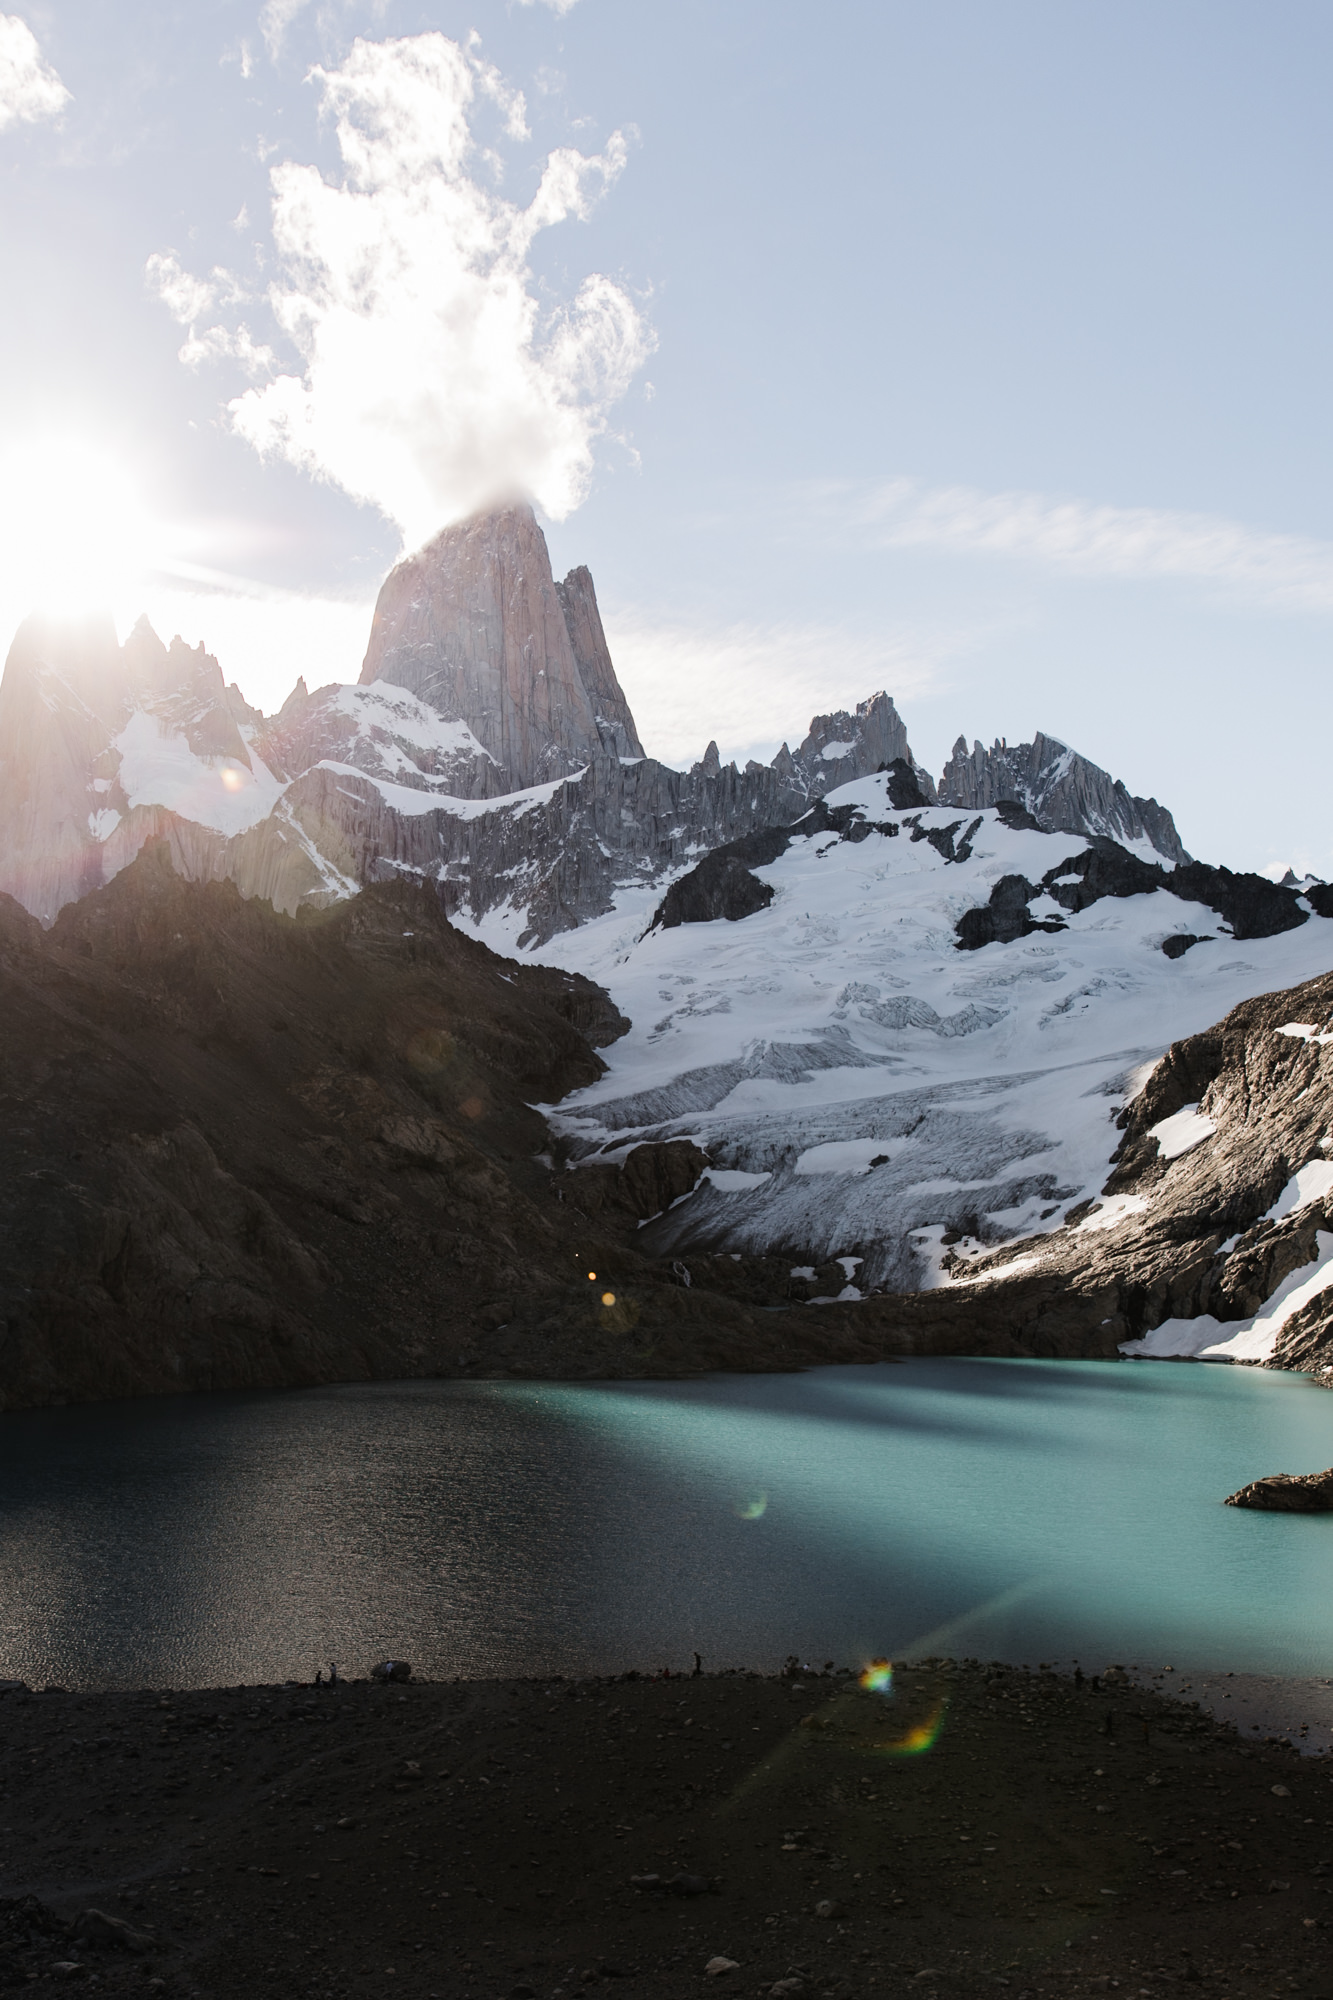 backpacking near Fitz Roy in Patagonia | Camp Poincenot + Lago De Los Tres | adventure elopement inspiration | the hearnes adventure wedding photography